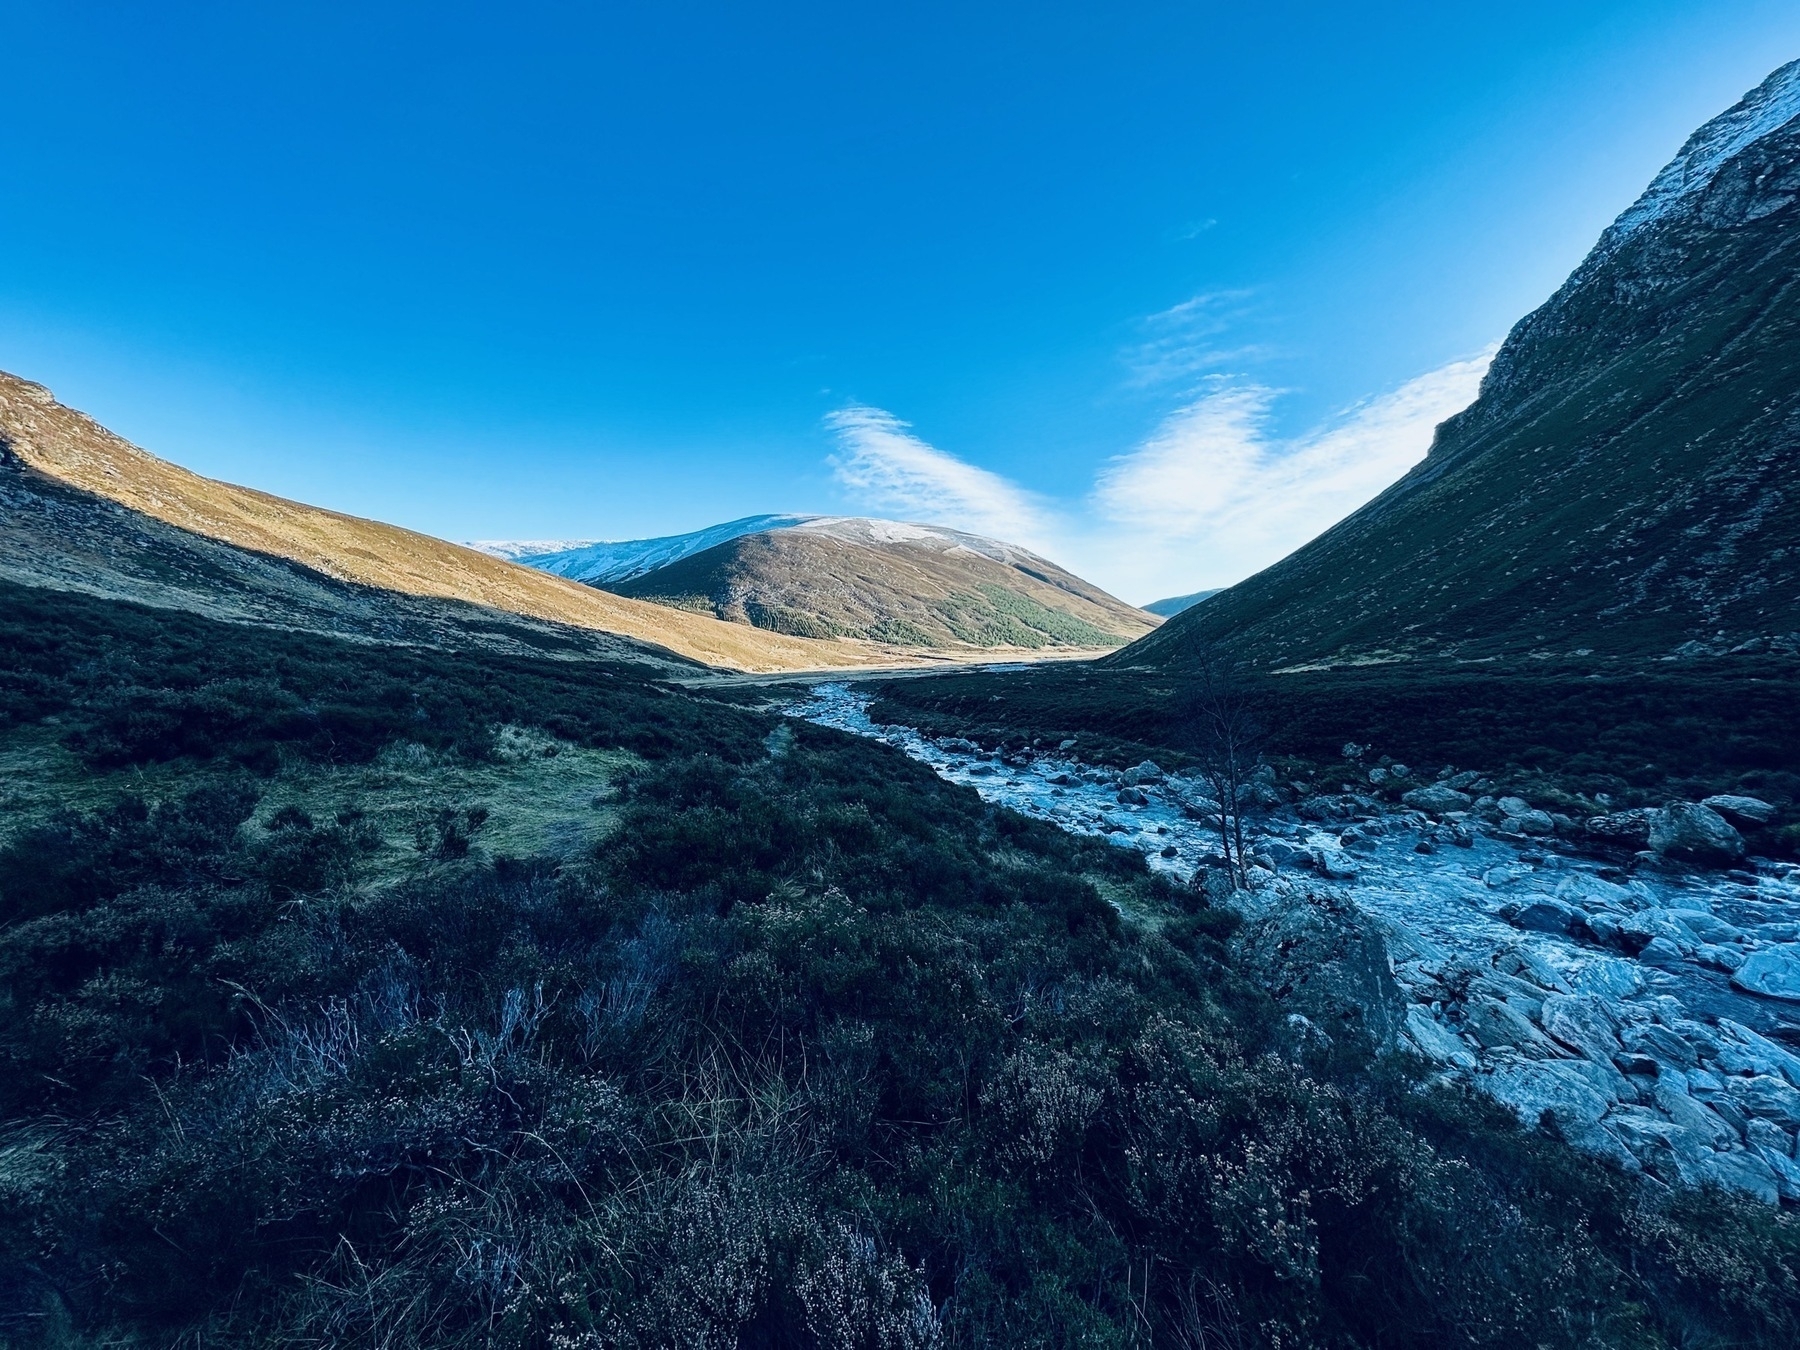 View from the Falls of Unich, down towards Glen Lee.